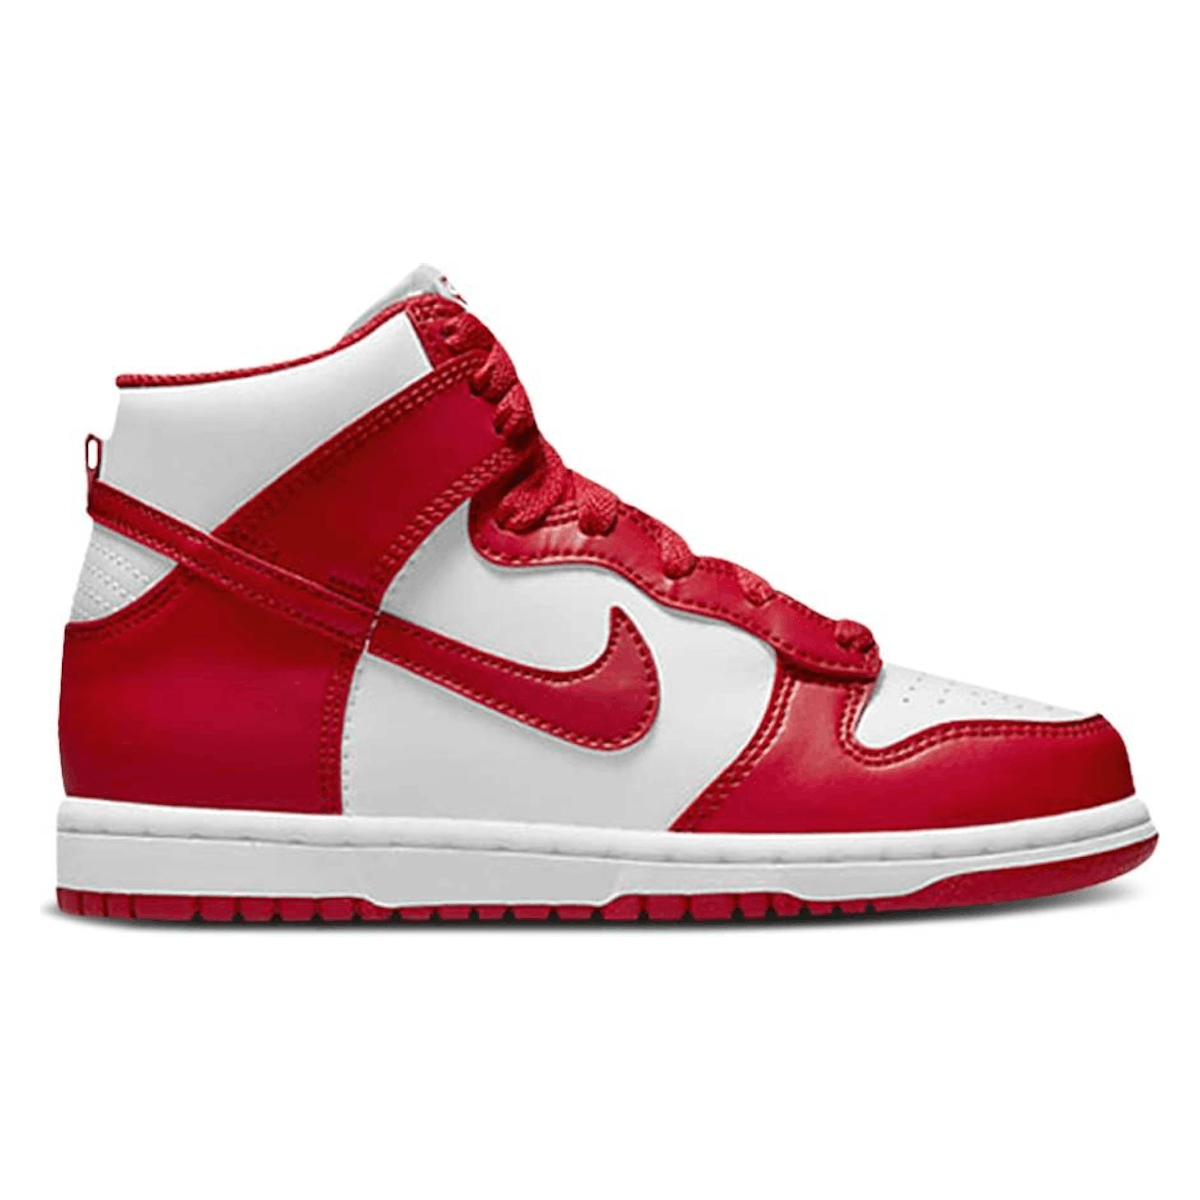 Nike Dunk High PS "University Red"